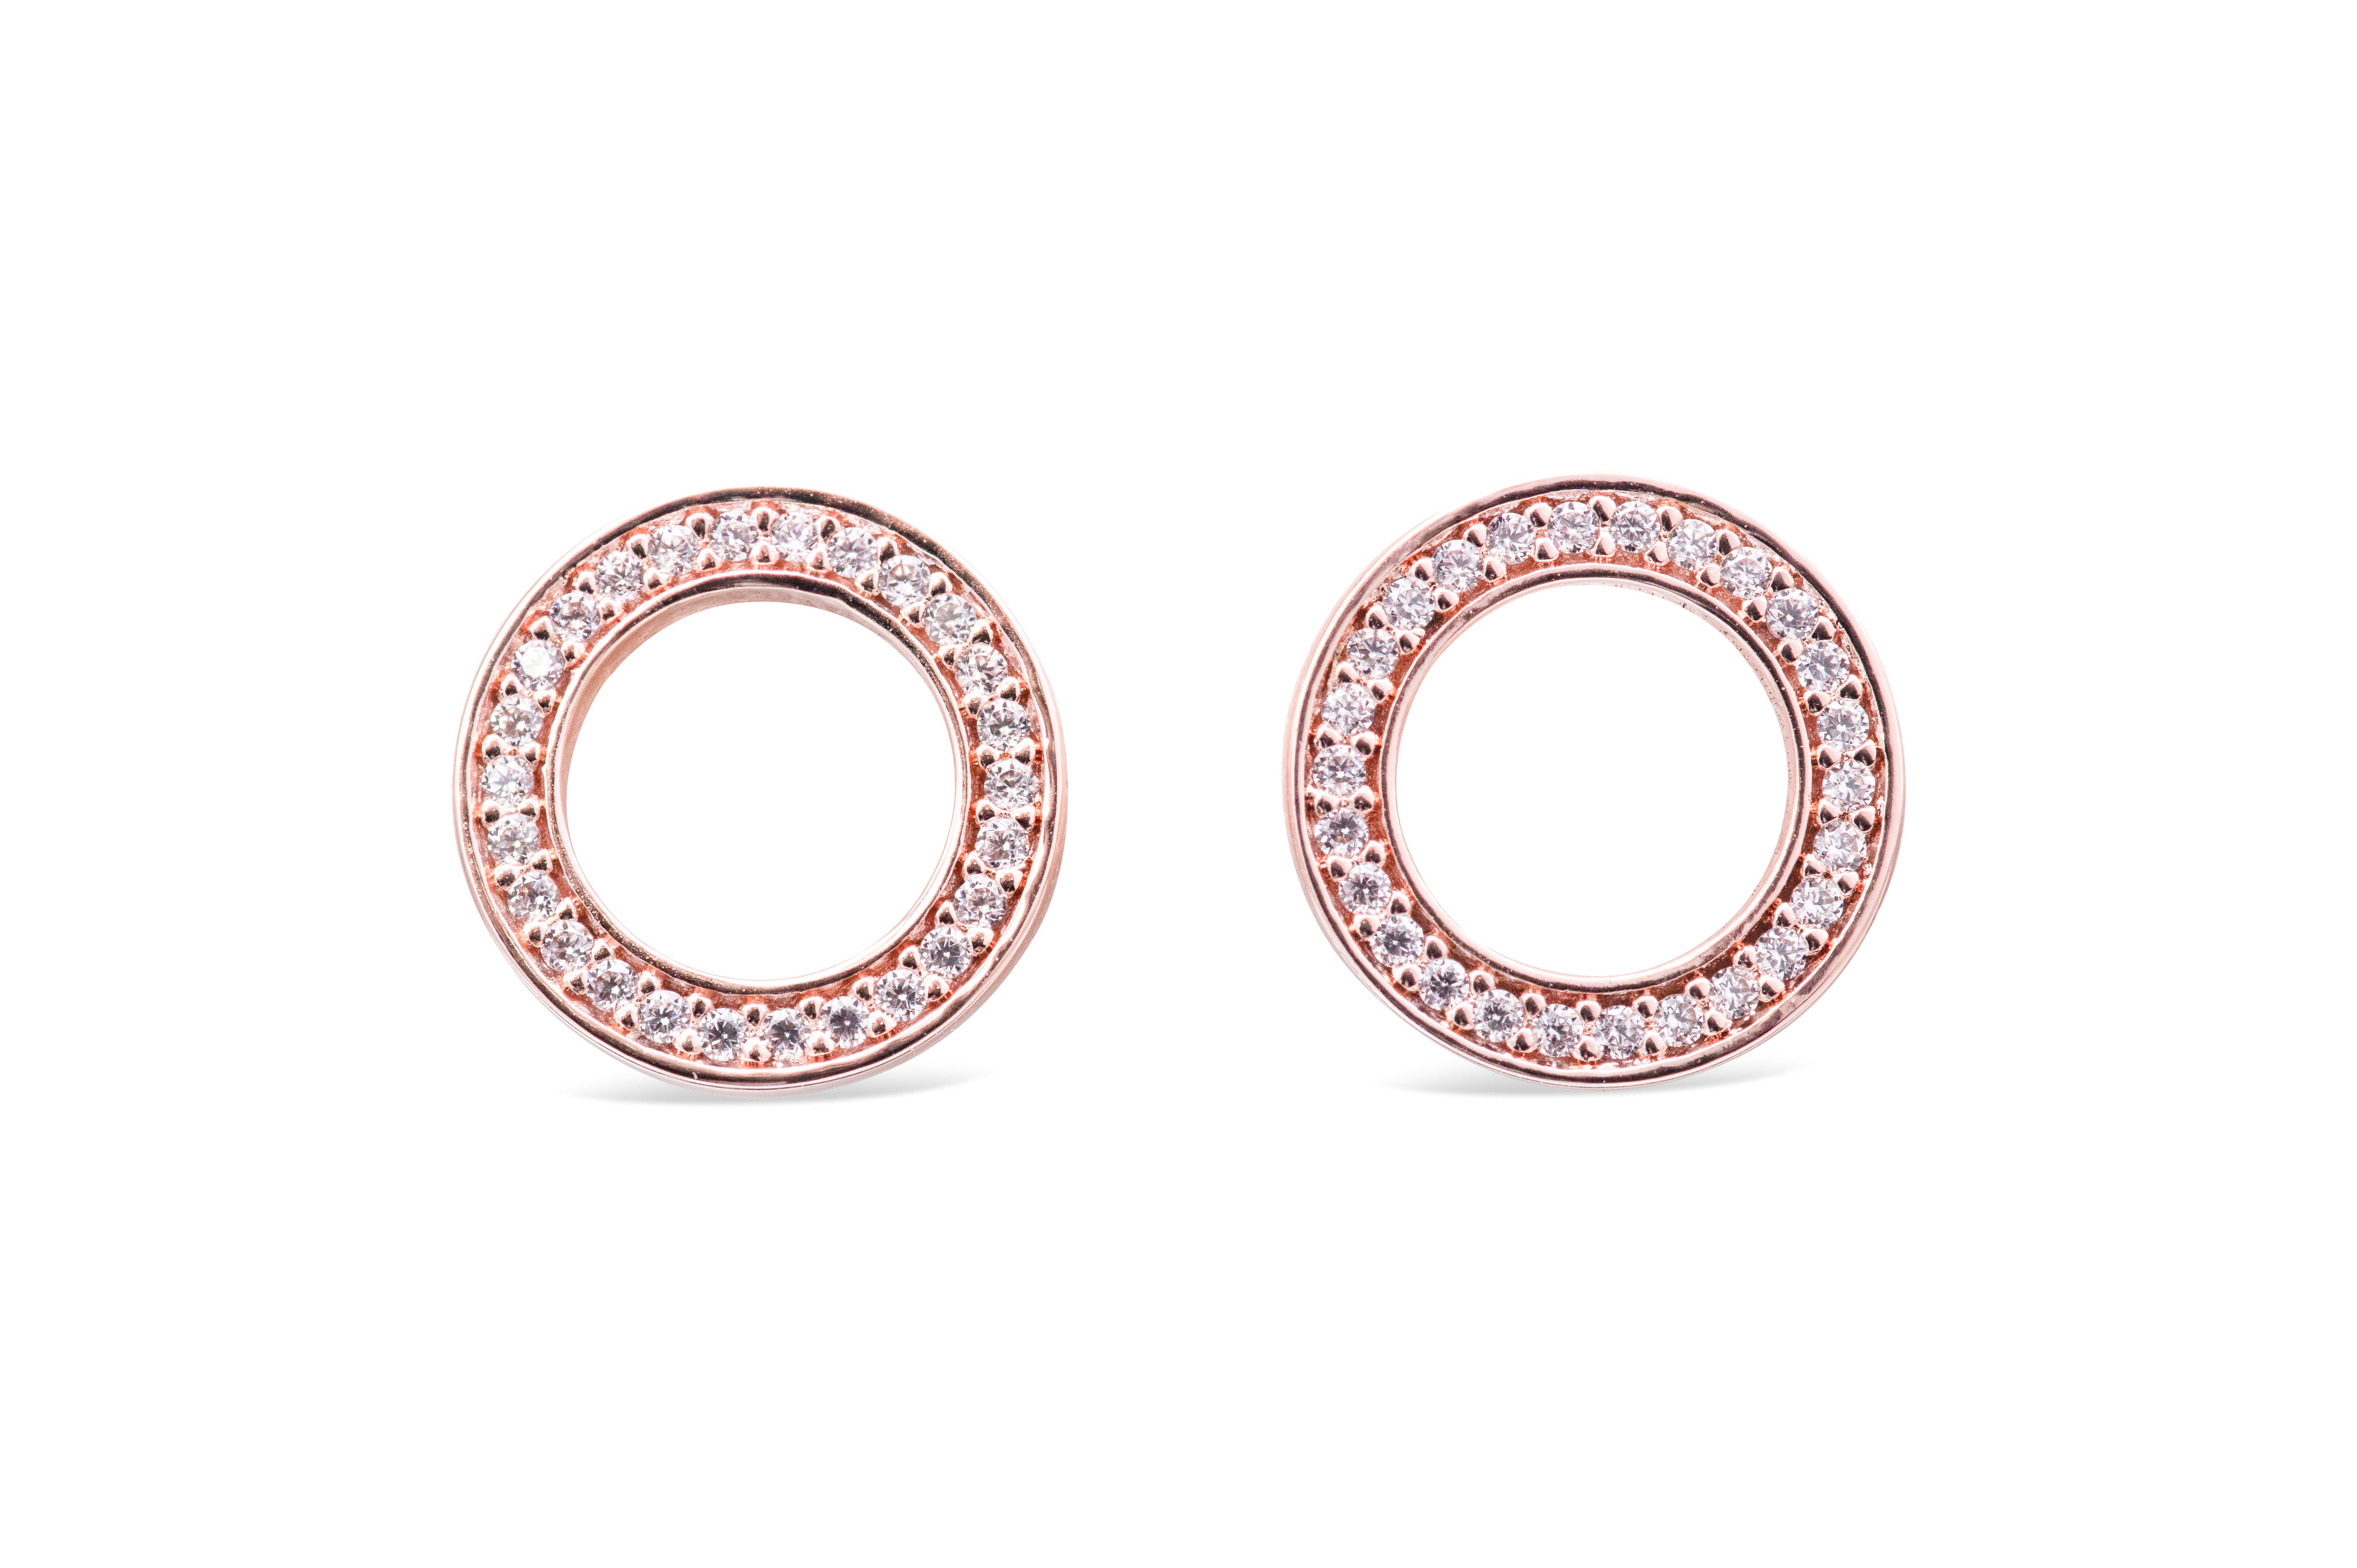 PANDORA Stud Earrings Forever PANDORA with Clear CZ